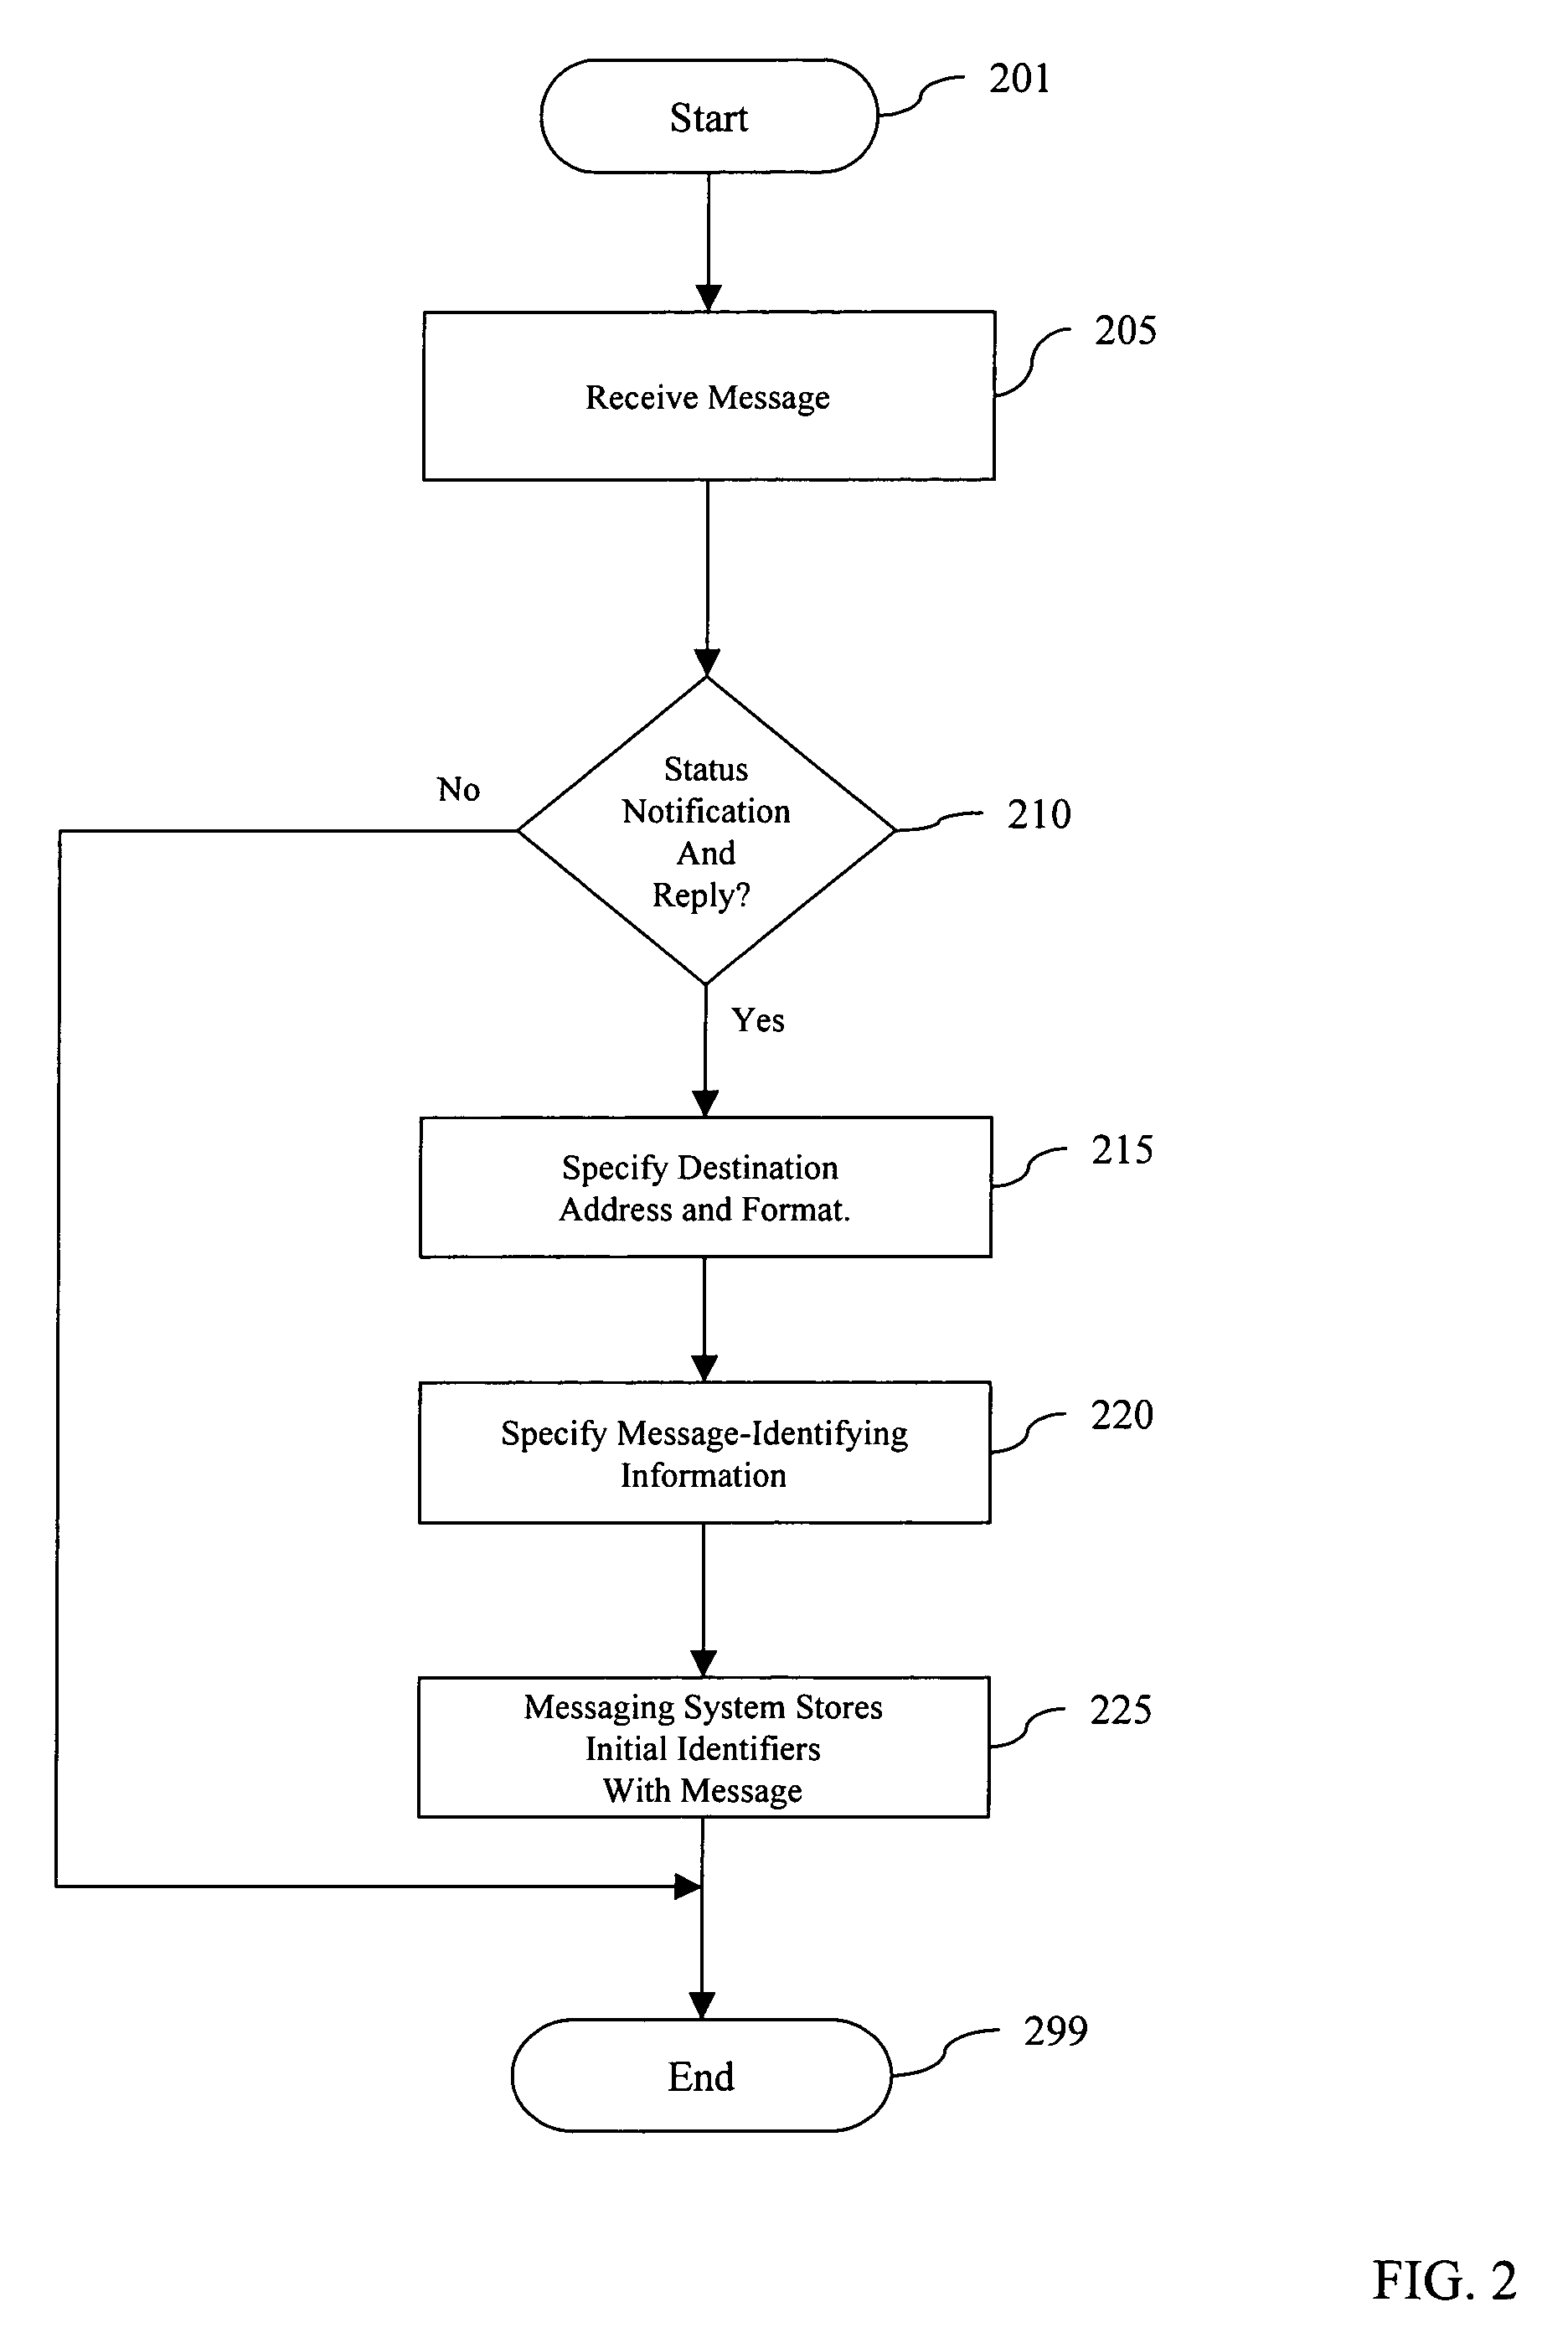 System and method for electronic message status notification and reply using various electronic media